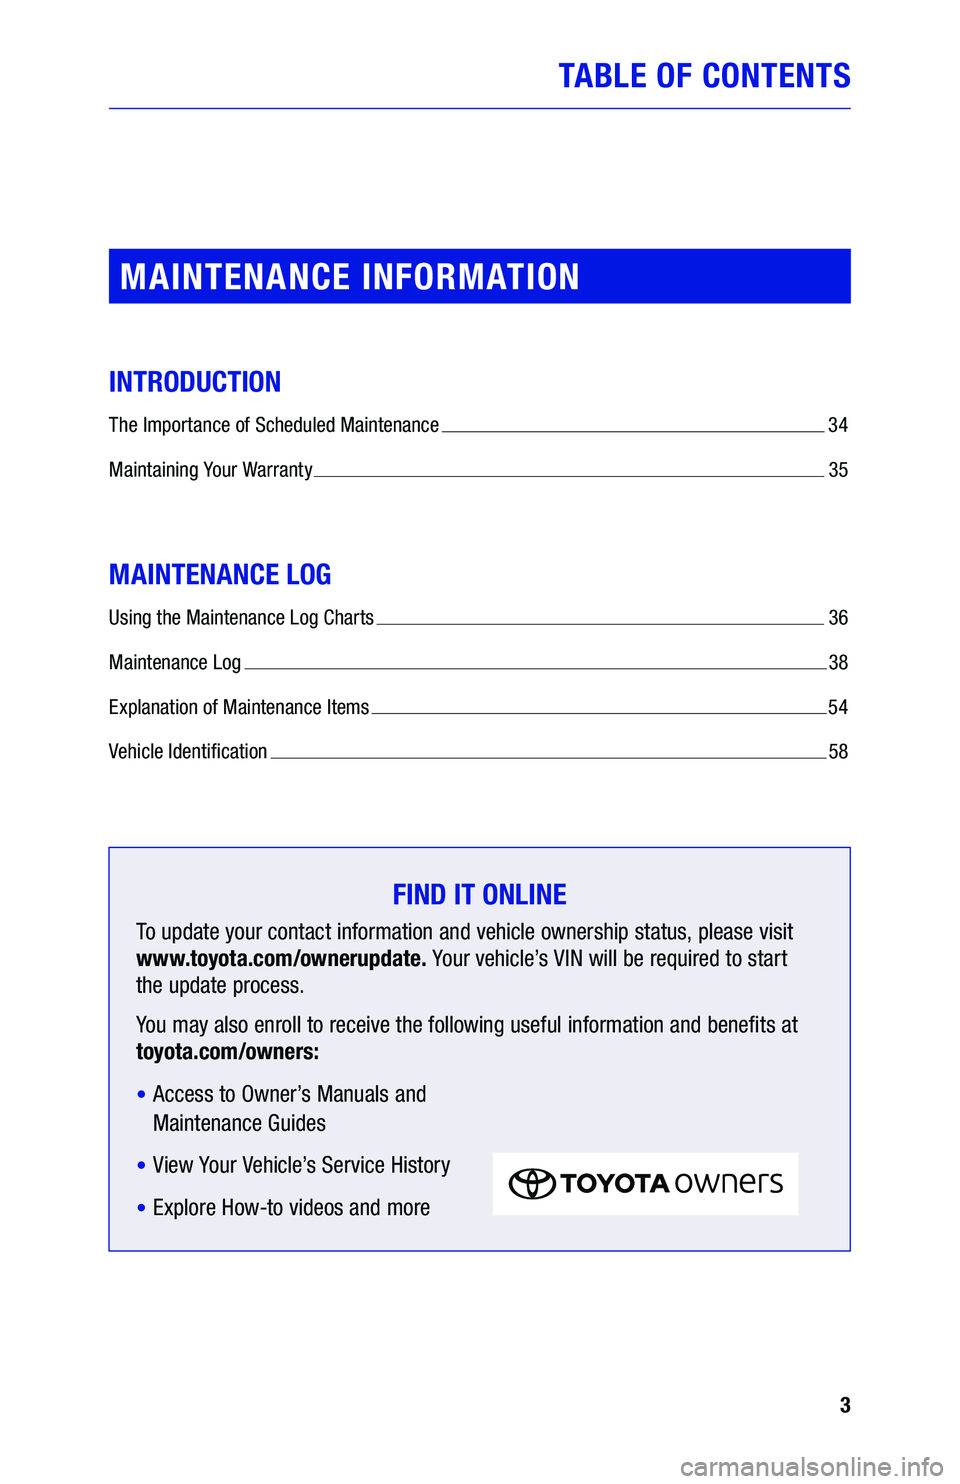 TOYOTA CAMRY 2019  Warranties & Maintenance Guides (in English) 3
TABLE OF CONTENTS
FIND IT ONLINE
To update your contact information and vehicle ownership status, please visit  
www.toyota.com/ownerupdate.  Your vehicle’s VIN will be required to start   
the up